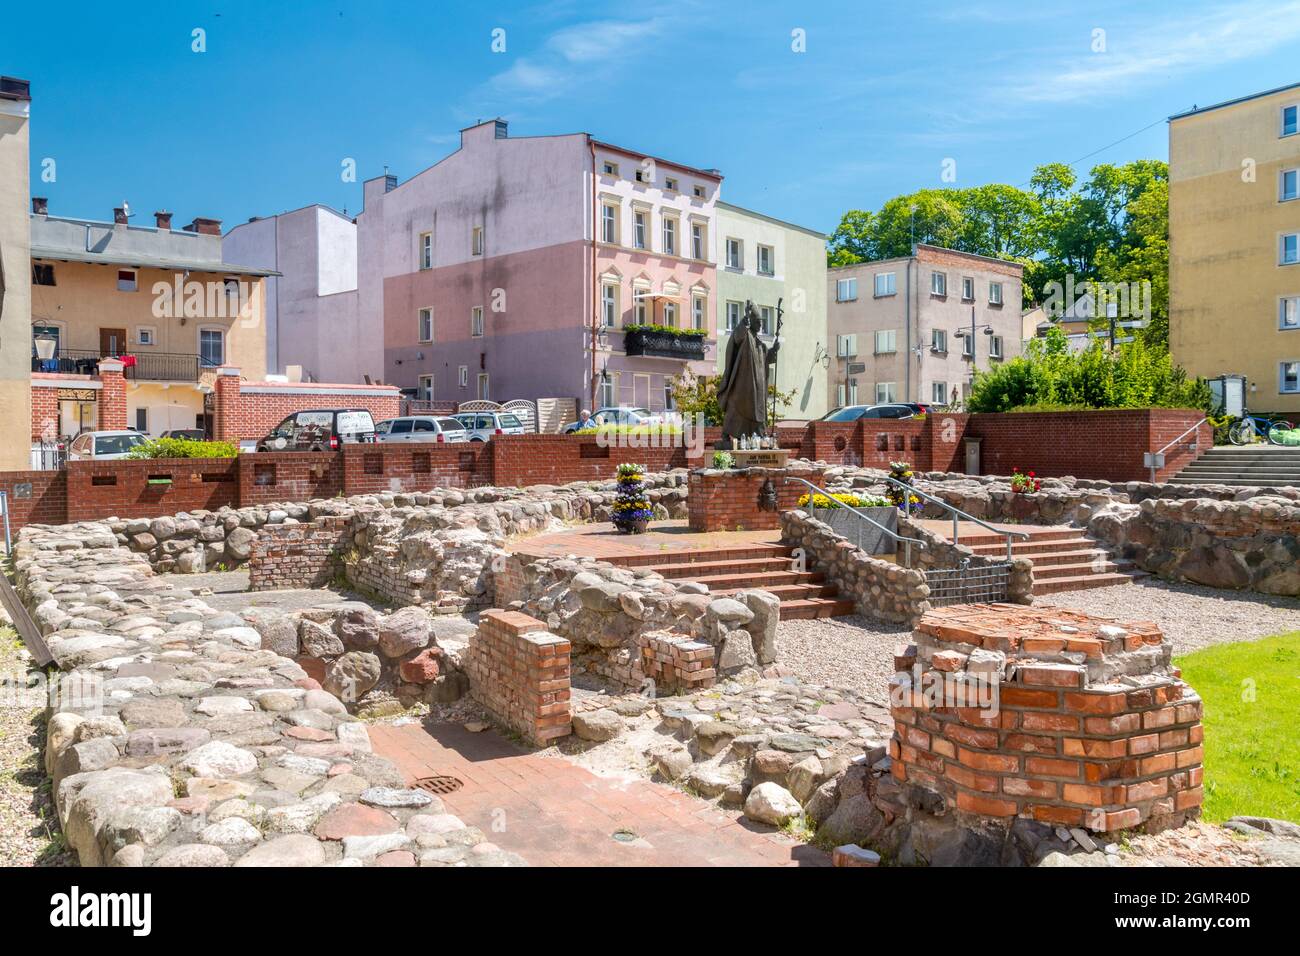 Bytow, Poland - May 31, 2021: Square with John Paul II sculpture and remains of the former church of St. Catherine's are in Pottery Square. Stock Photo